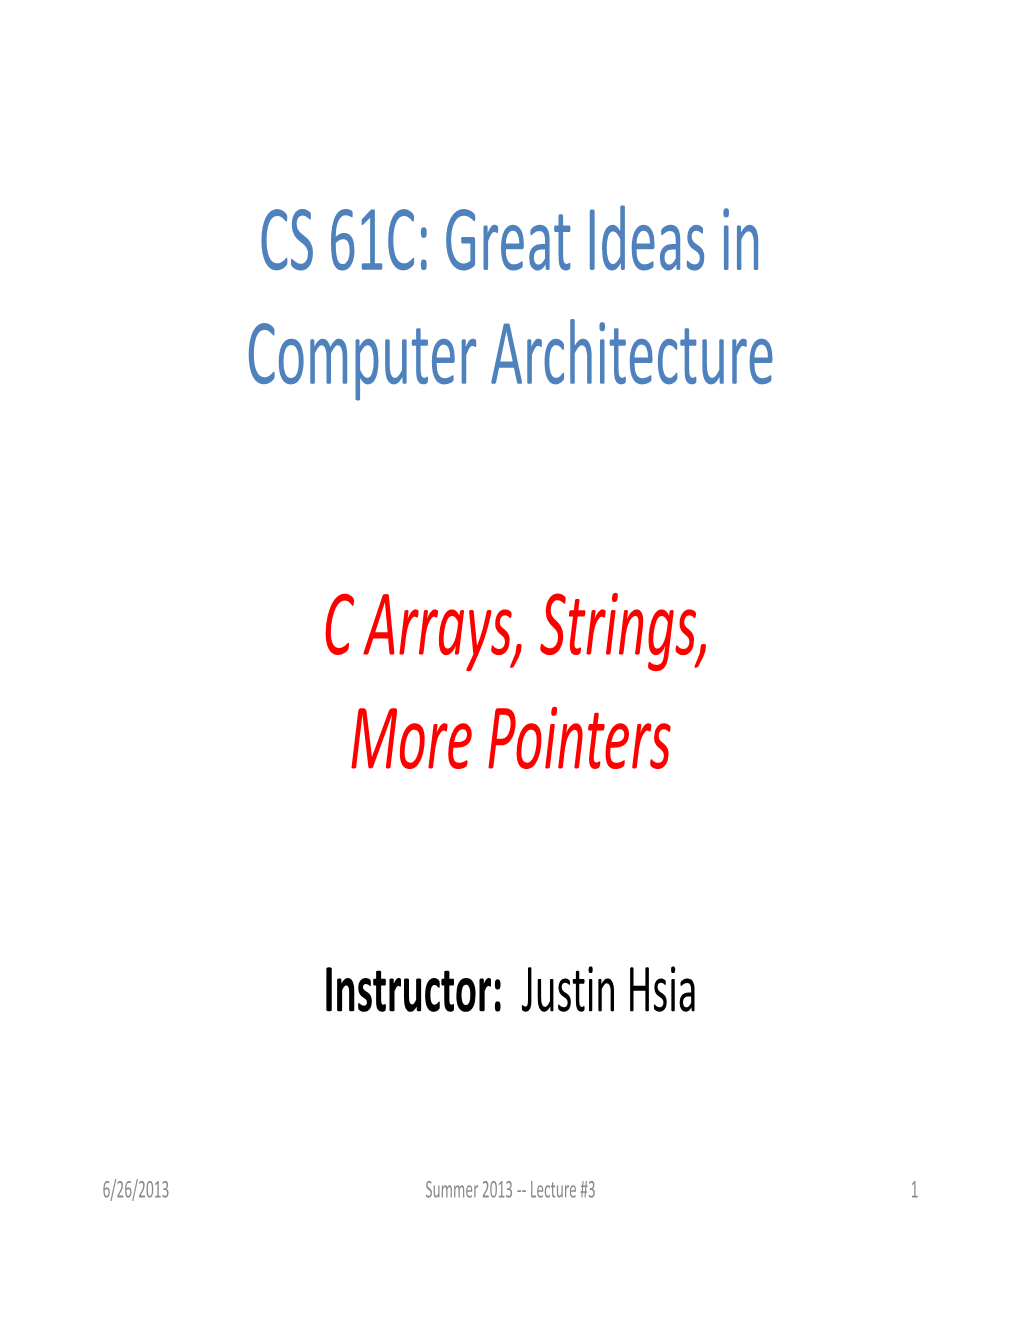 CS 61C: Great Ideas in Computer Architecture C Arrays, Strings, More Pointers